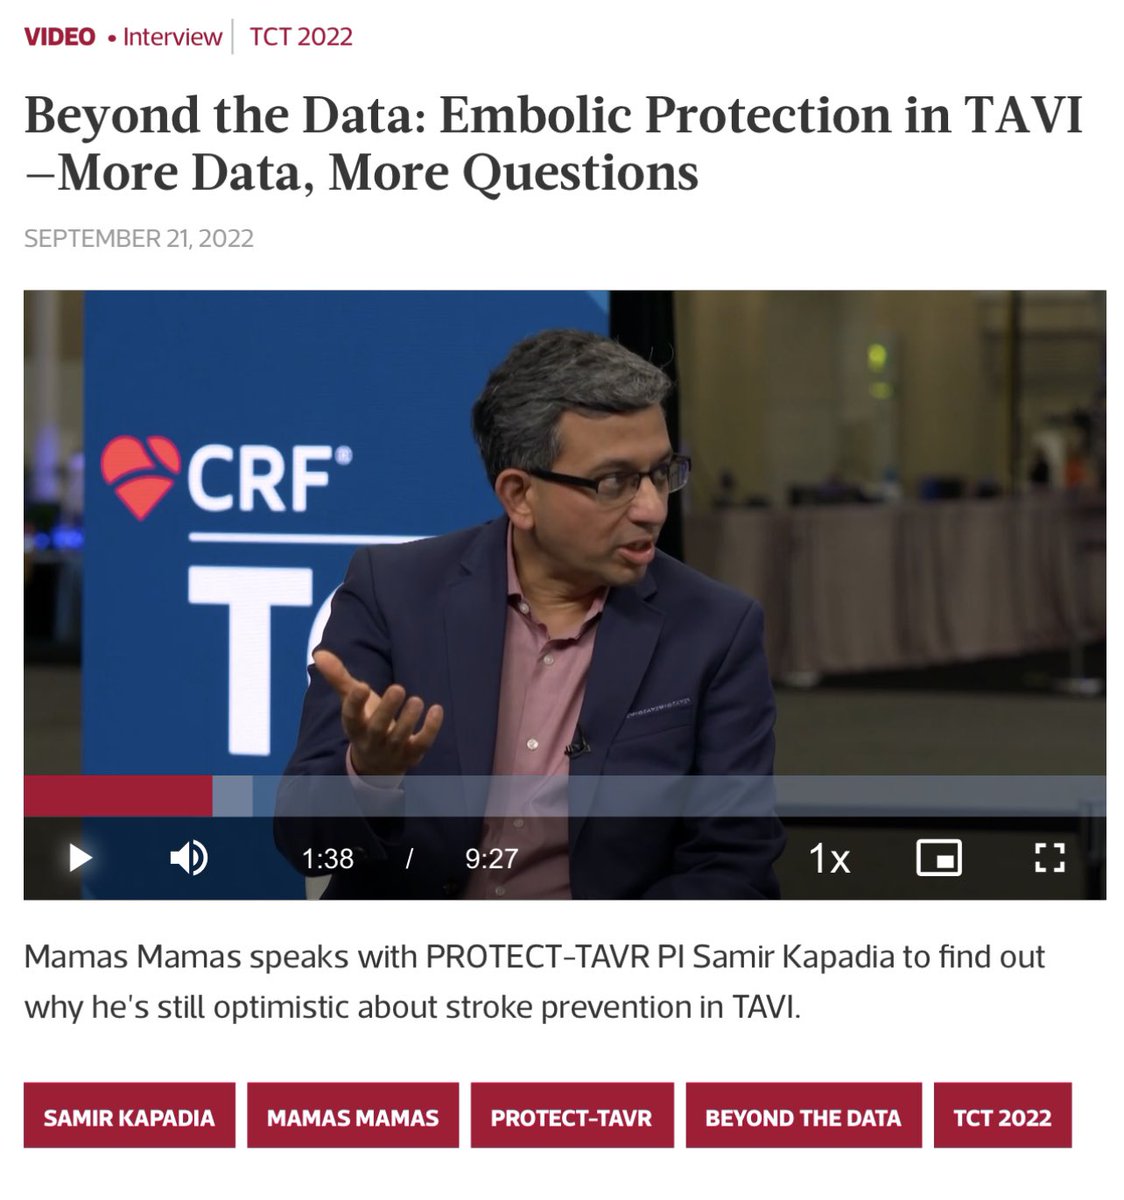 My @tctmd interview with @tavrkapadia around #Protect_TAVR ➡️ tctmd.com/videos/beyond-… 💥what pts if any should we use these devices? 💥 why don't we see clinically relevant ⬇️ in all cause cva? @ShelleyWood2 @AnkurKalraMD @djc795 @toreyj01 @mirvatalasnag @ncurzen @RodrigoBagur